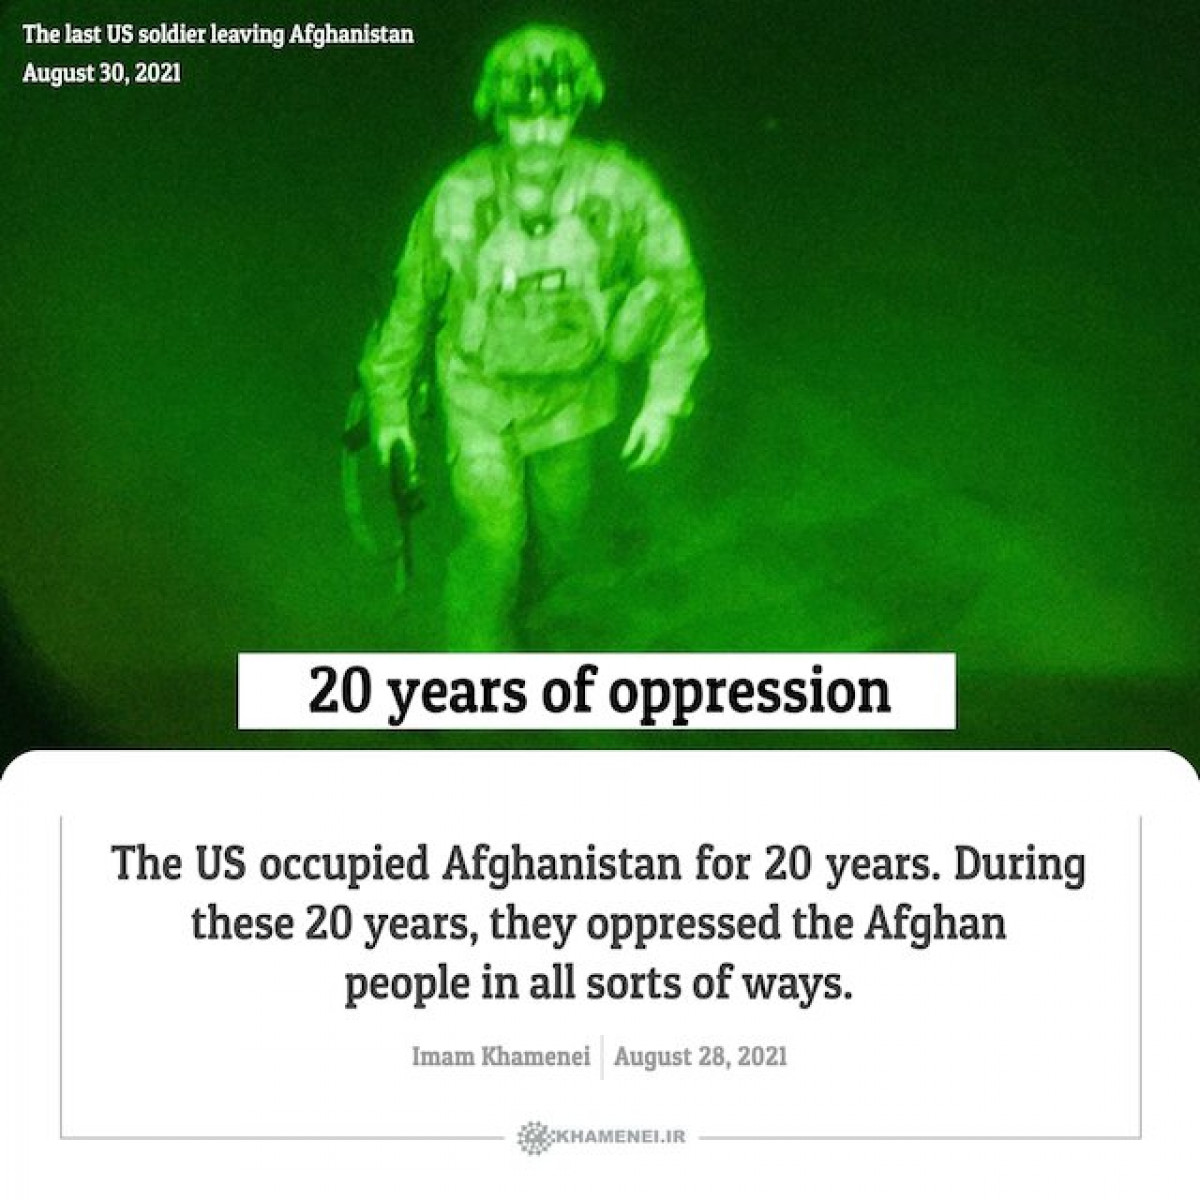 20 years of oppression